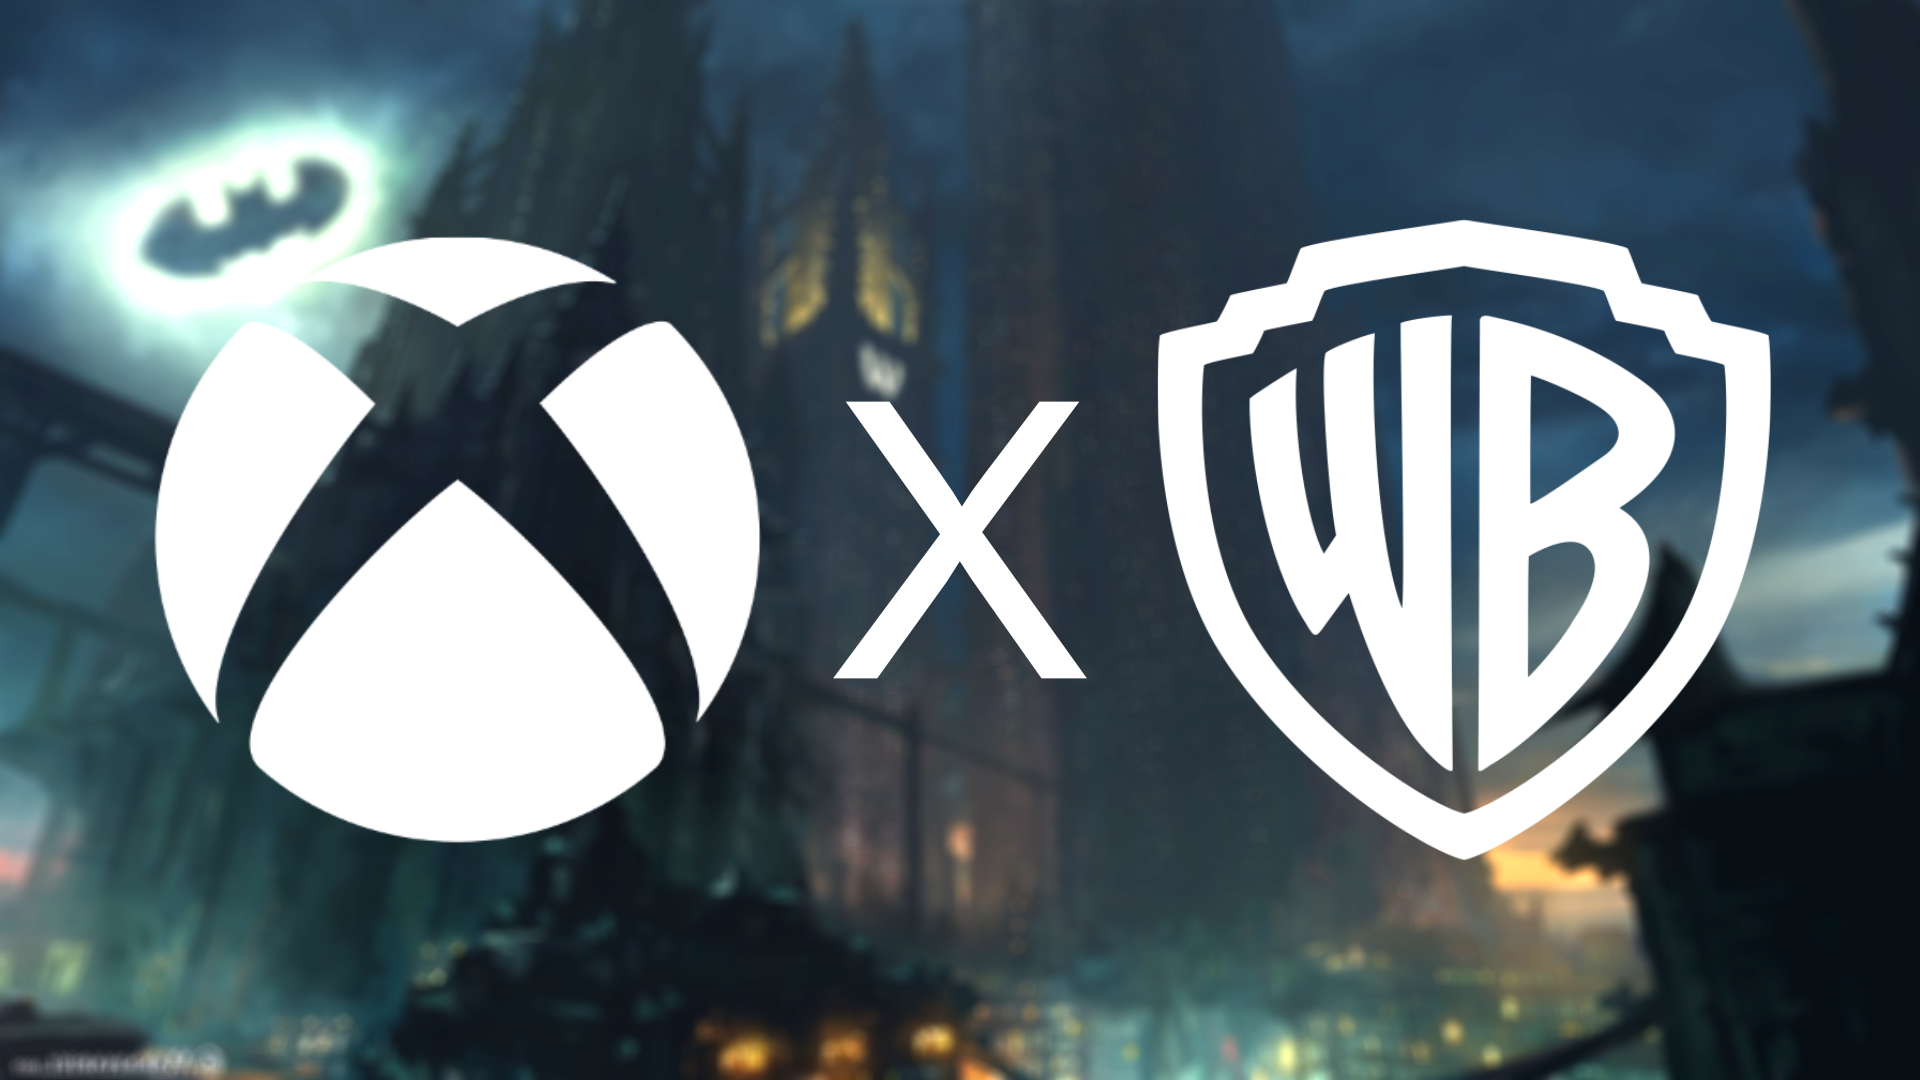 Report: Microsoft interested in buying Warner Bros. games division